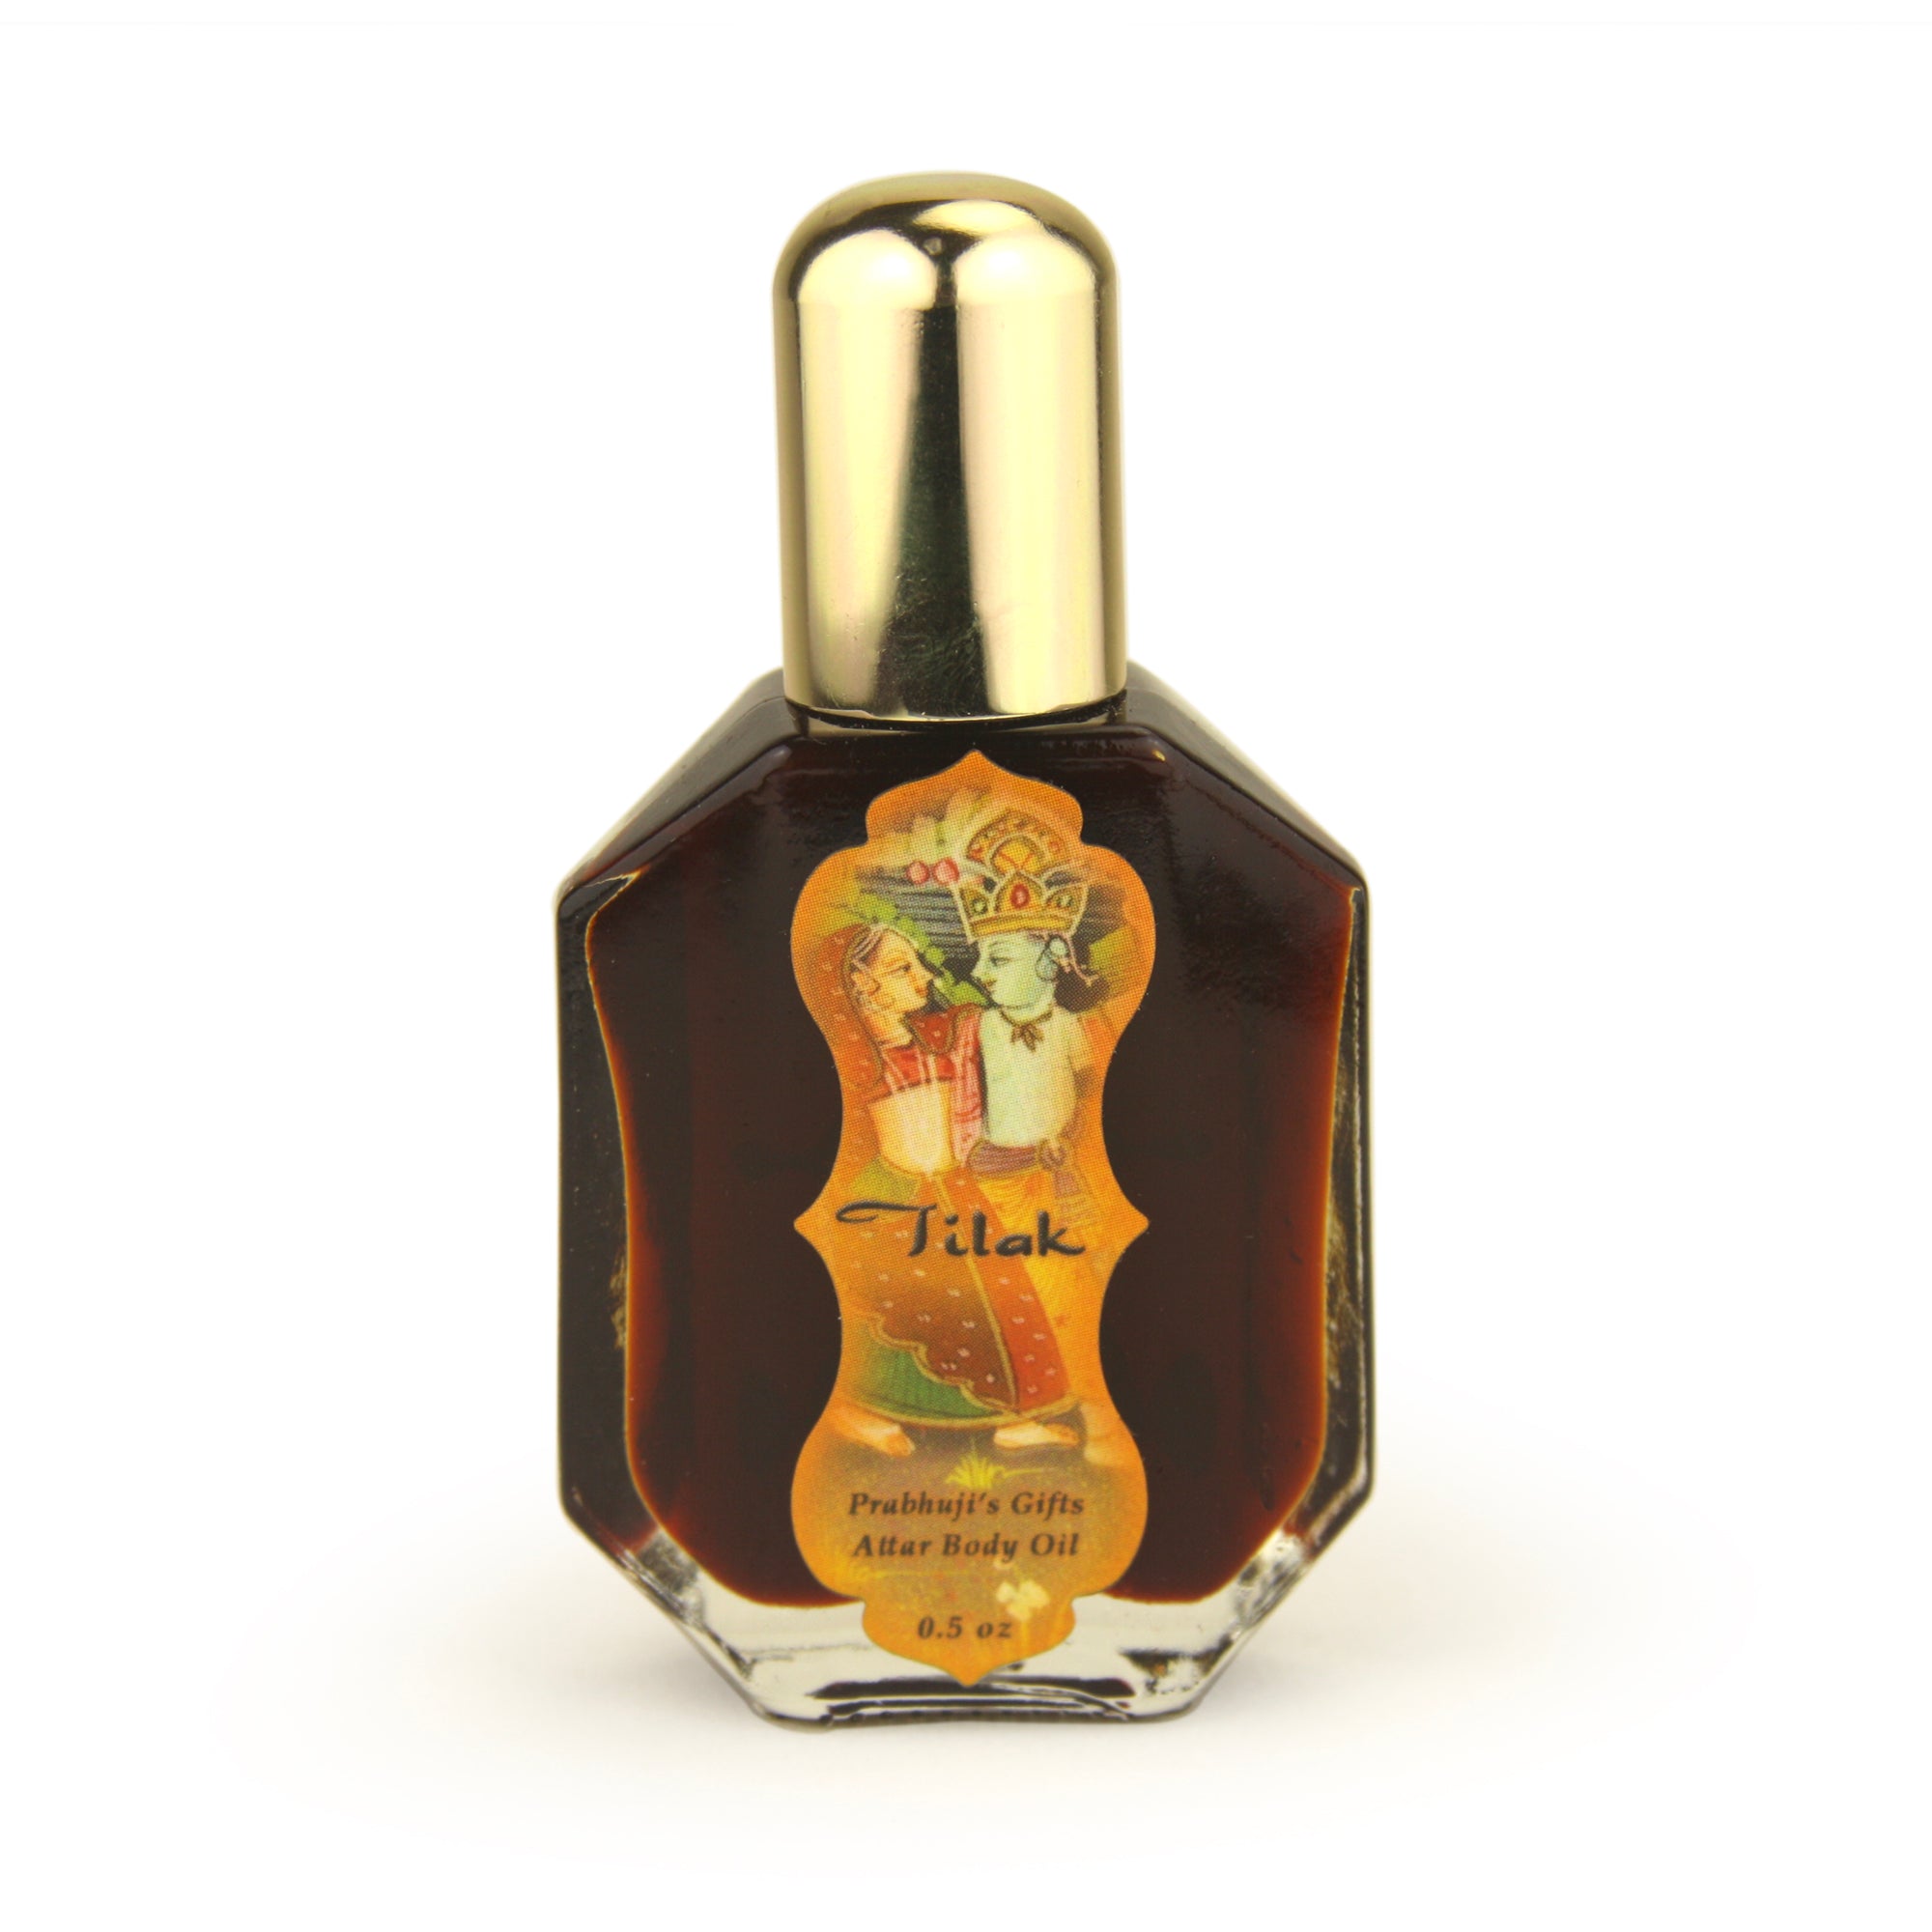 Tilak Attar Oil - Love - Wholesale and Retail by Prabhuji's Gifts